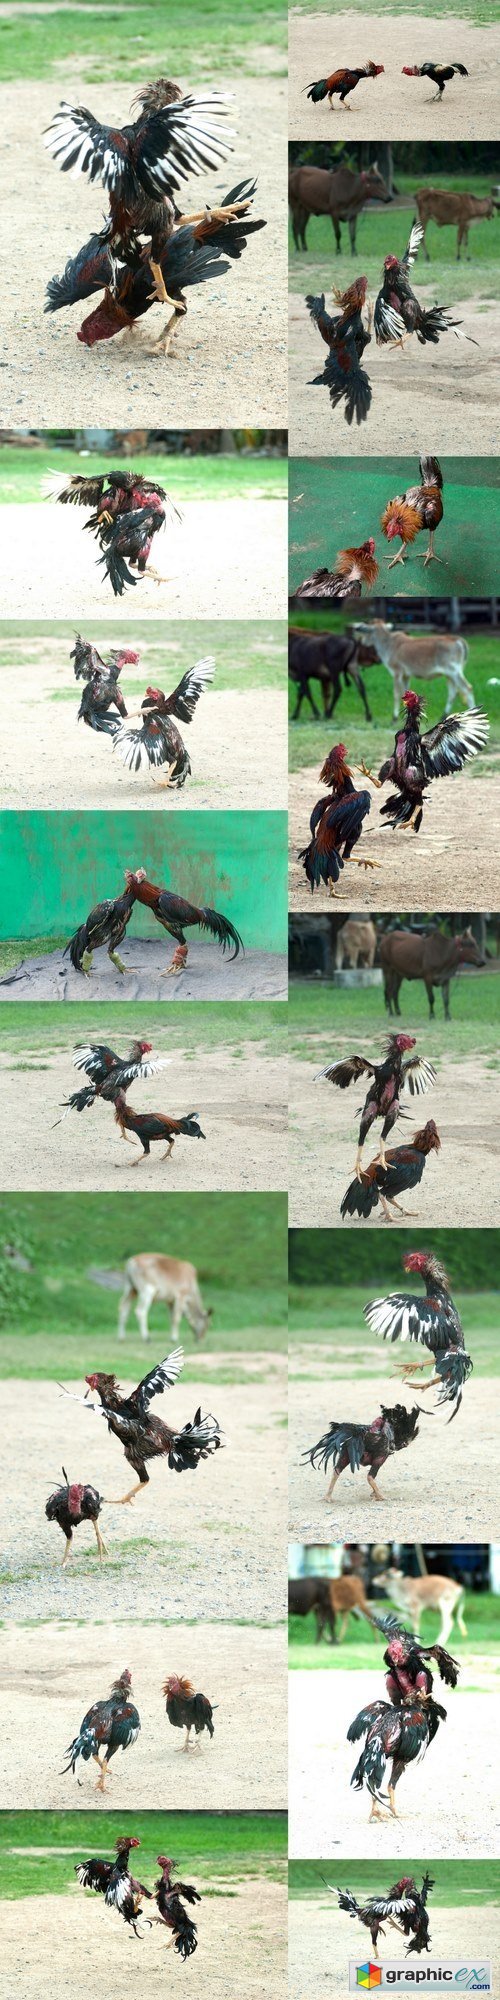 Cockfight in Thailand